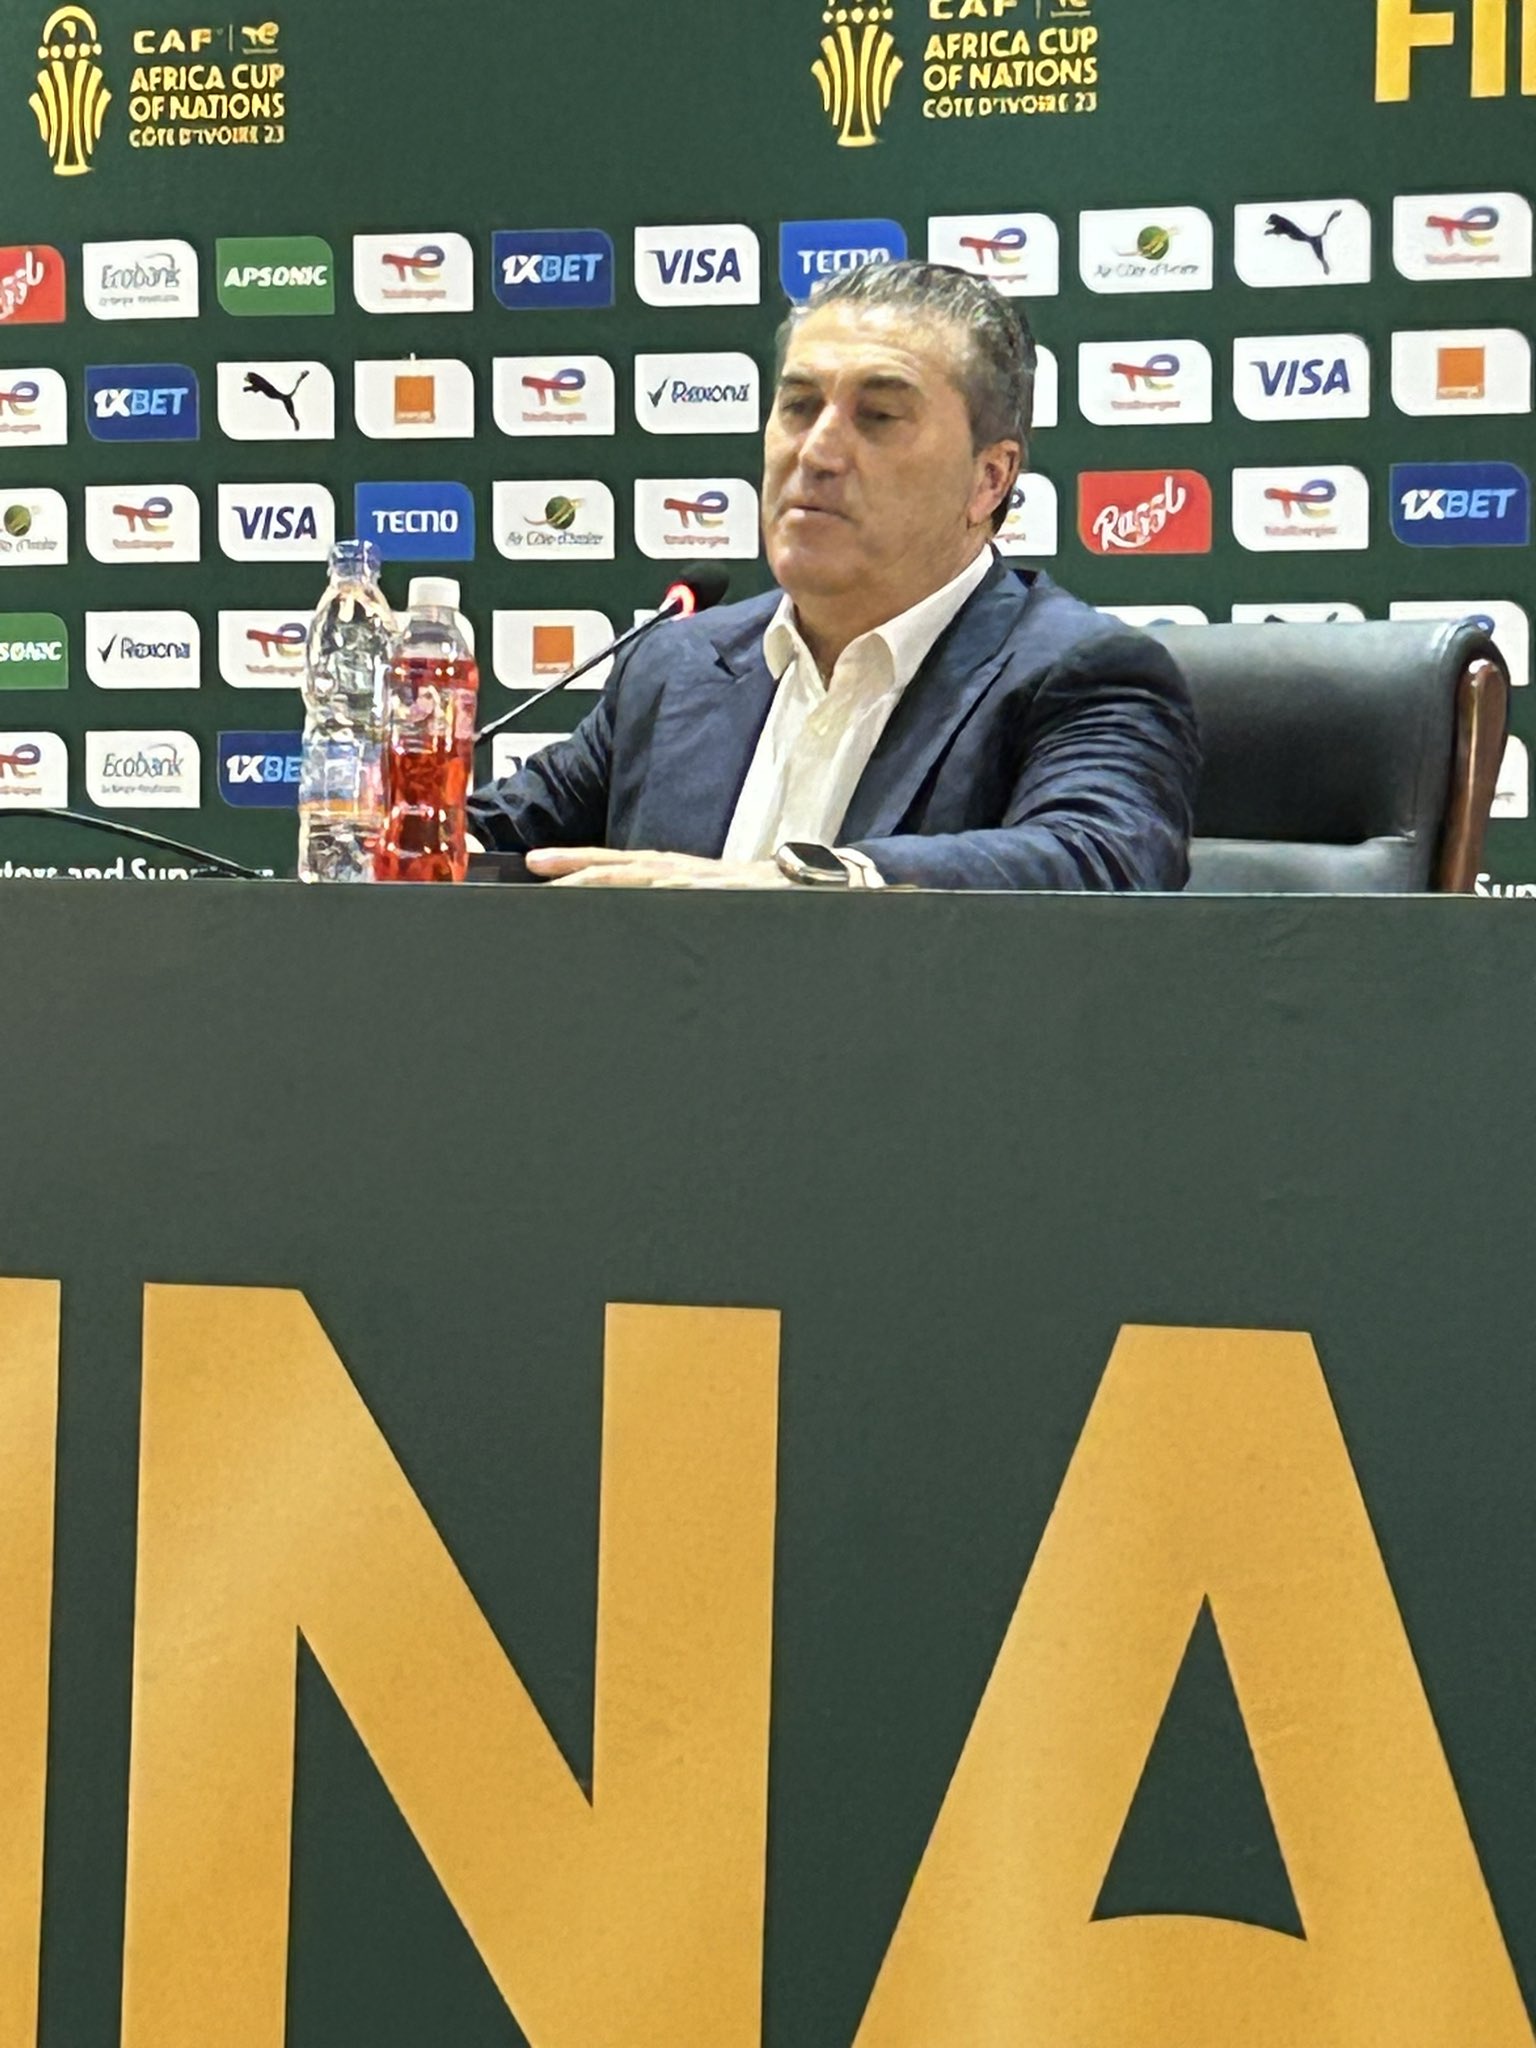 AFCON 2023: "Cote d'Ivoire was better - Jose Peseiro